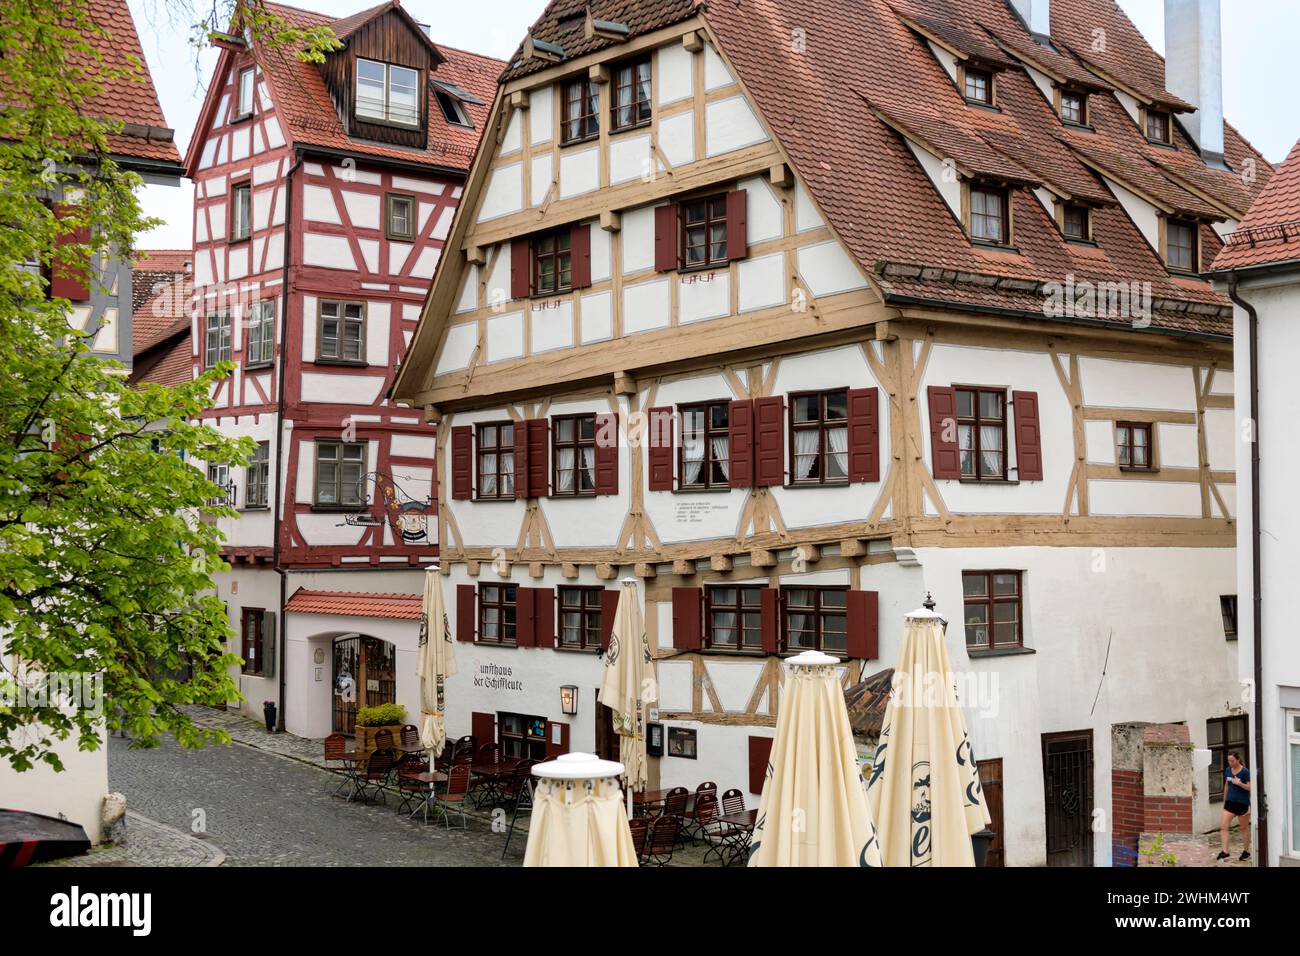 Sailors' guild house in the charming fishing district of Ulm, Germany Stock Photo